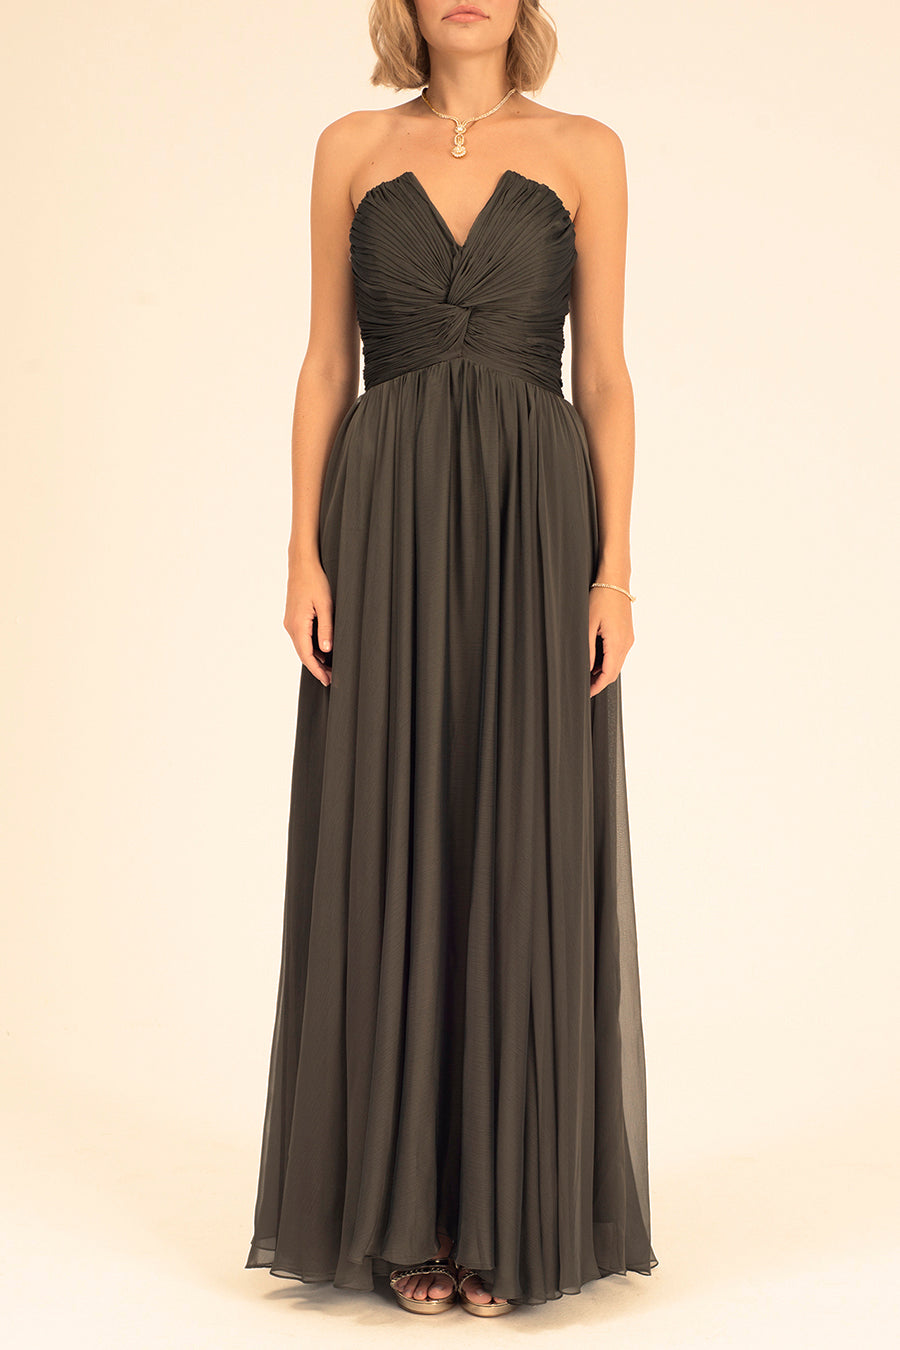 Leah - Mystic Evenings | Evening and Prom Dresses